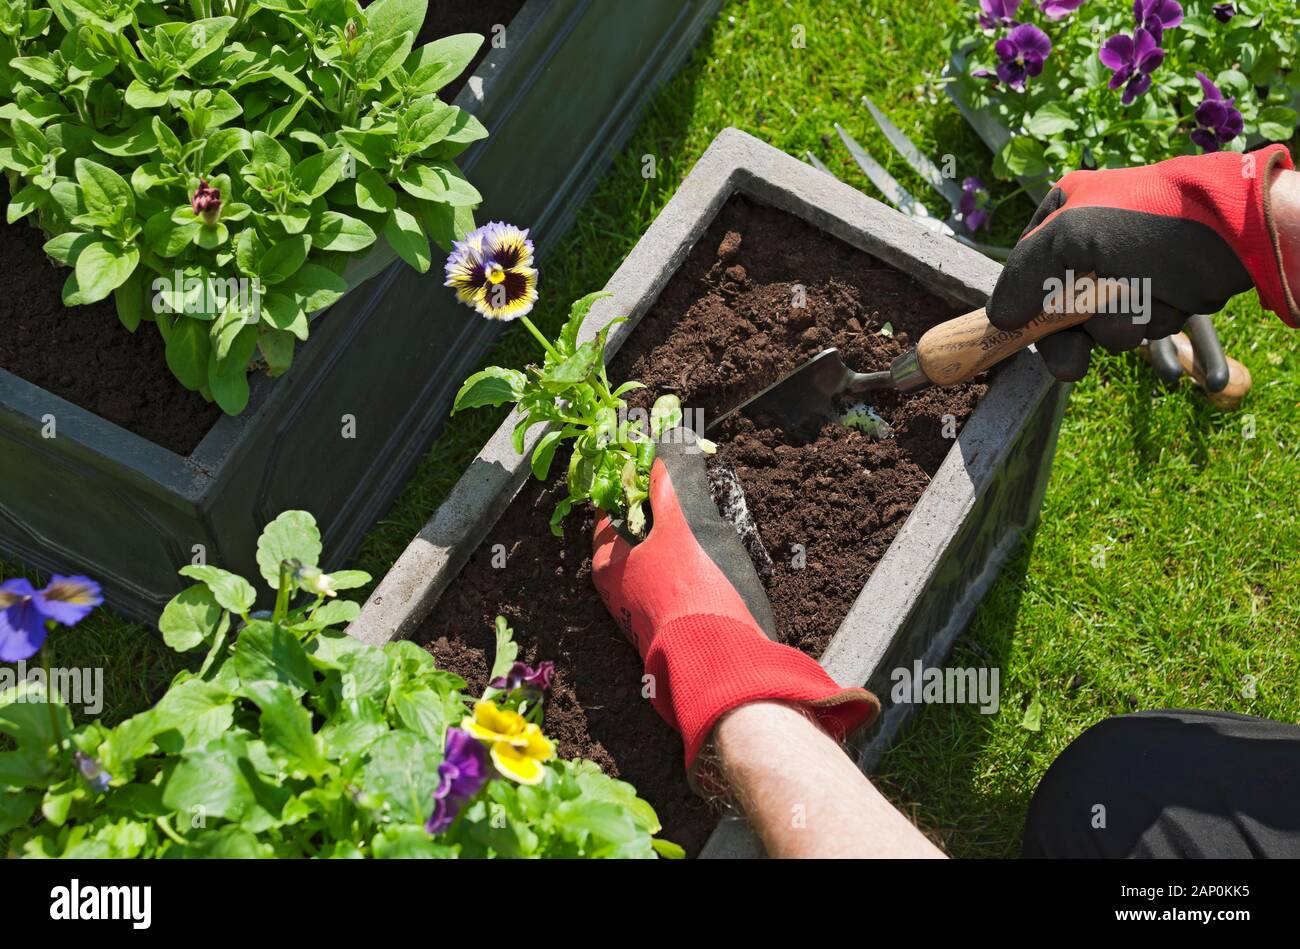 Man planting pansies in a trough. Stock Photo